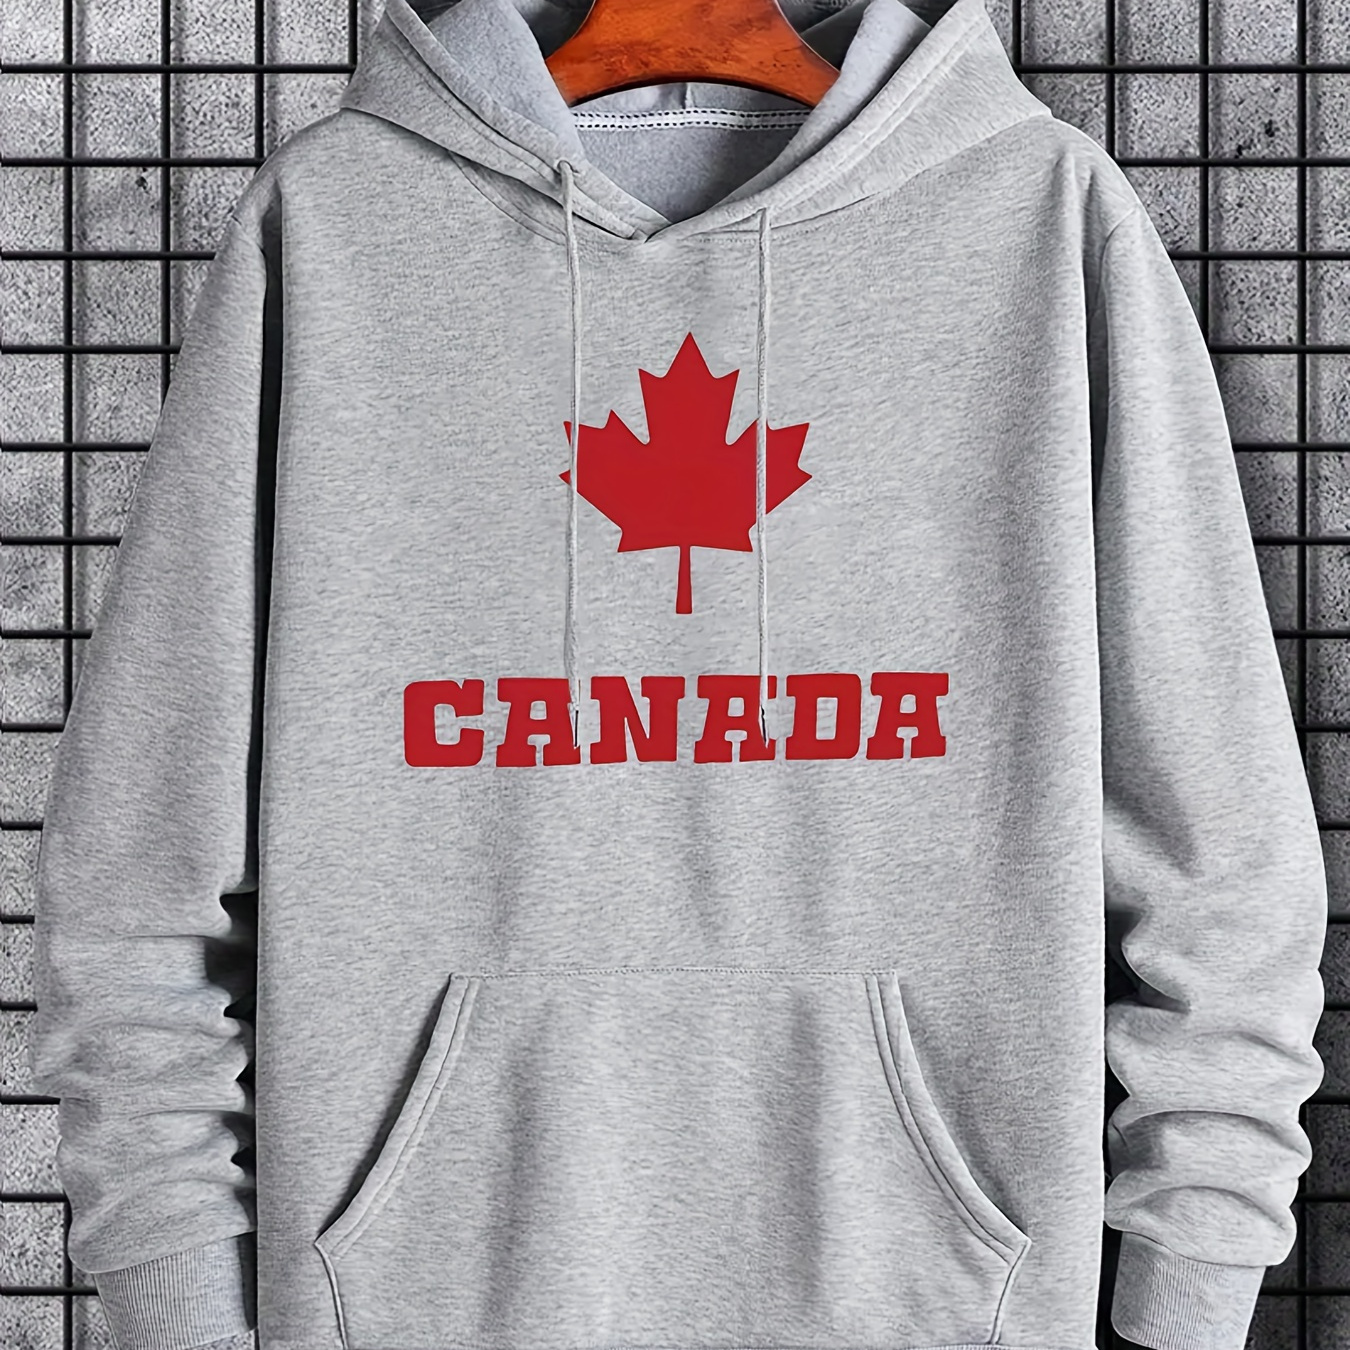 

Hoodies For Men, Maple Leaf Canada Print Hoodie, Men’s Casual Pullover Hooded Sweatshirt With Kangaroo Pocket For Spring Fall, As Gifts